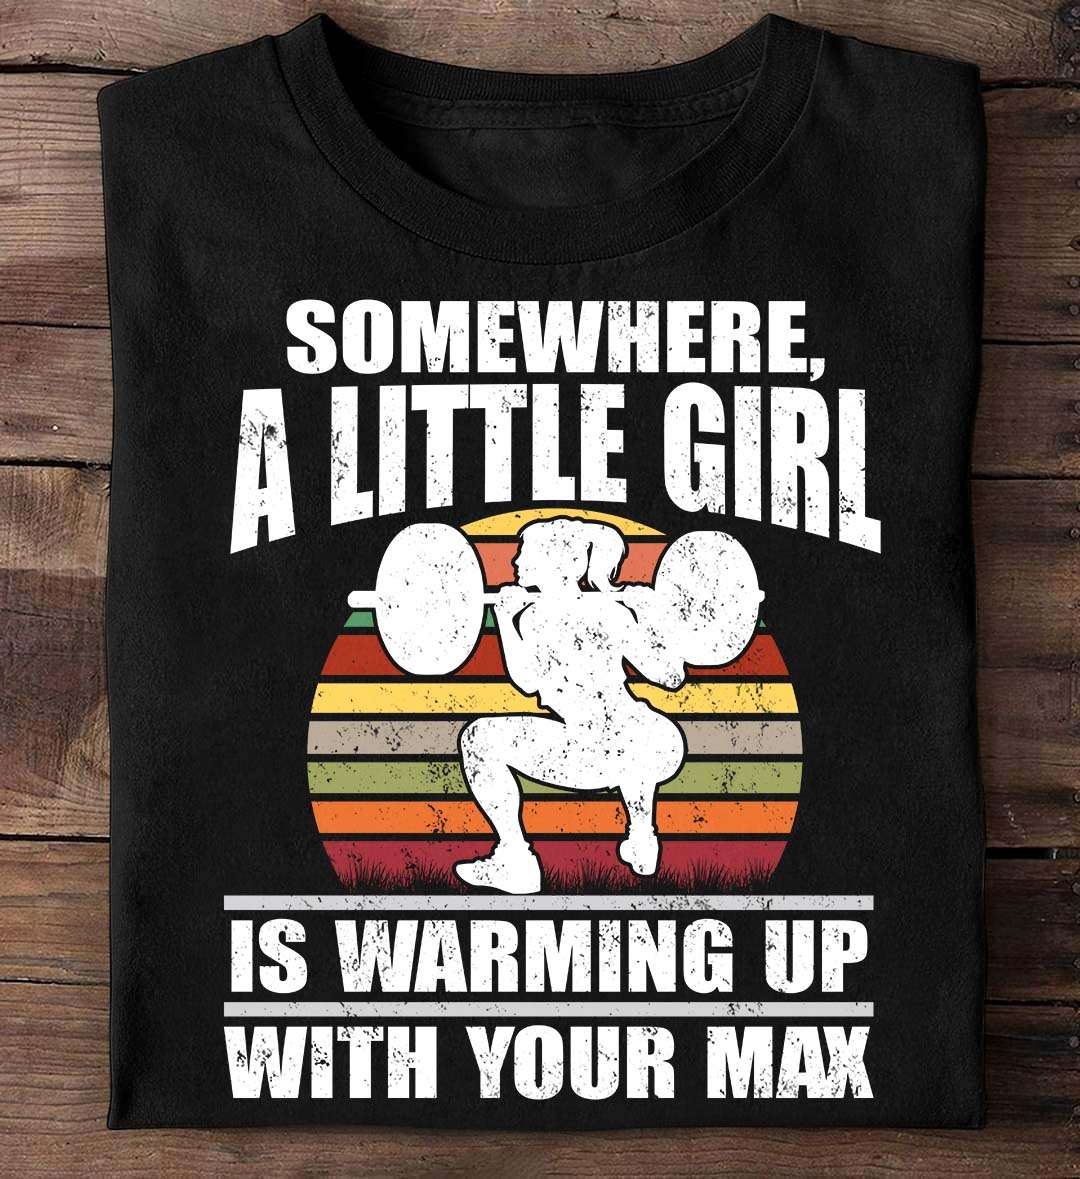 Somewhere a little girl is warming up with your max - Girl lifting iron, fitness girl